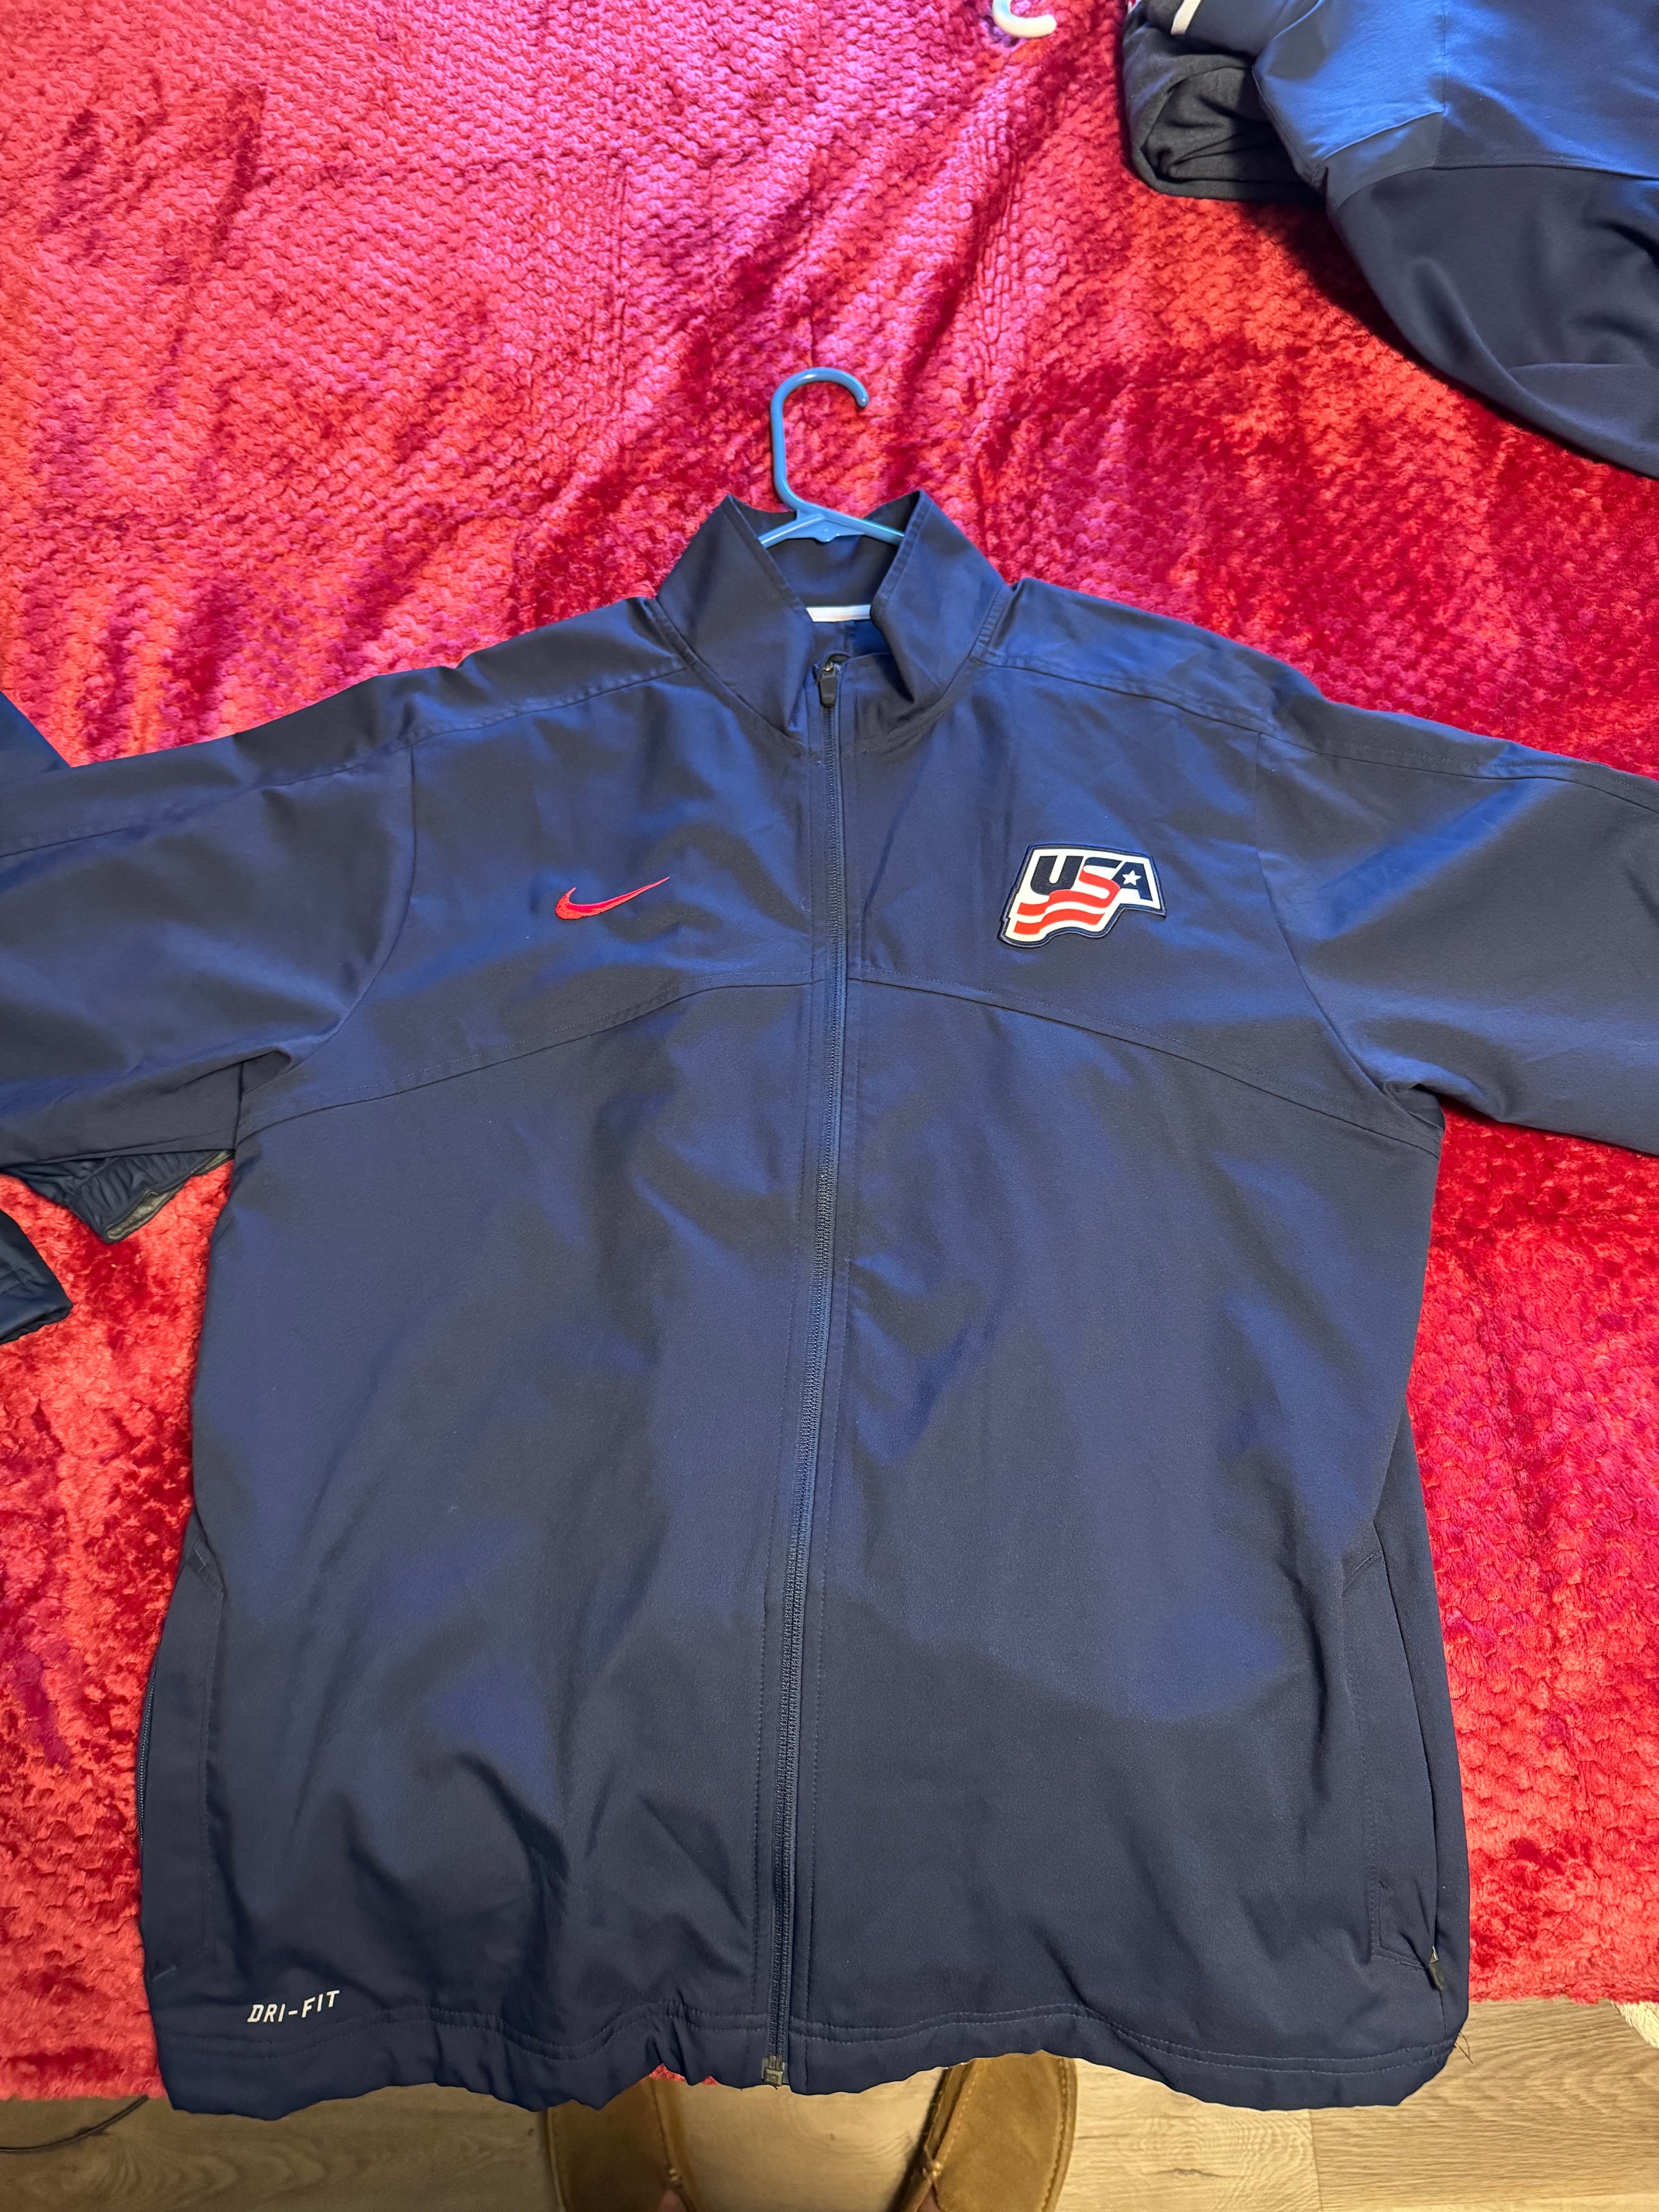 USA Hockey NTDP Team Issued Nike Track Suit (Smoke Free) Mint Condition